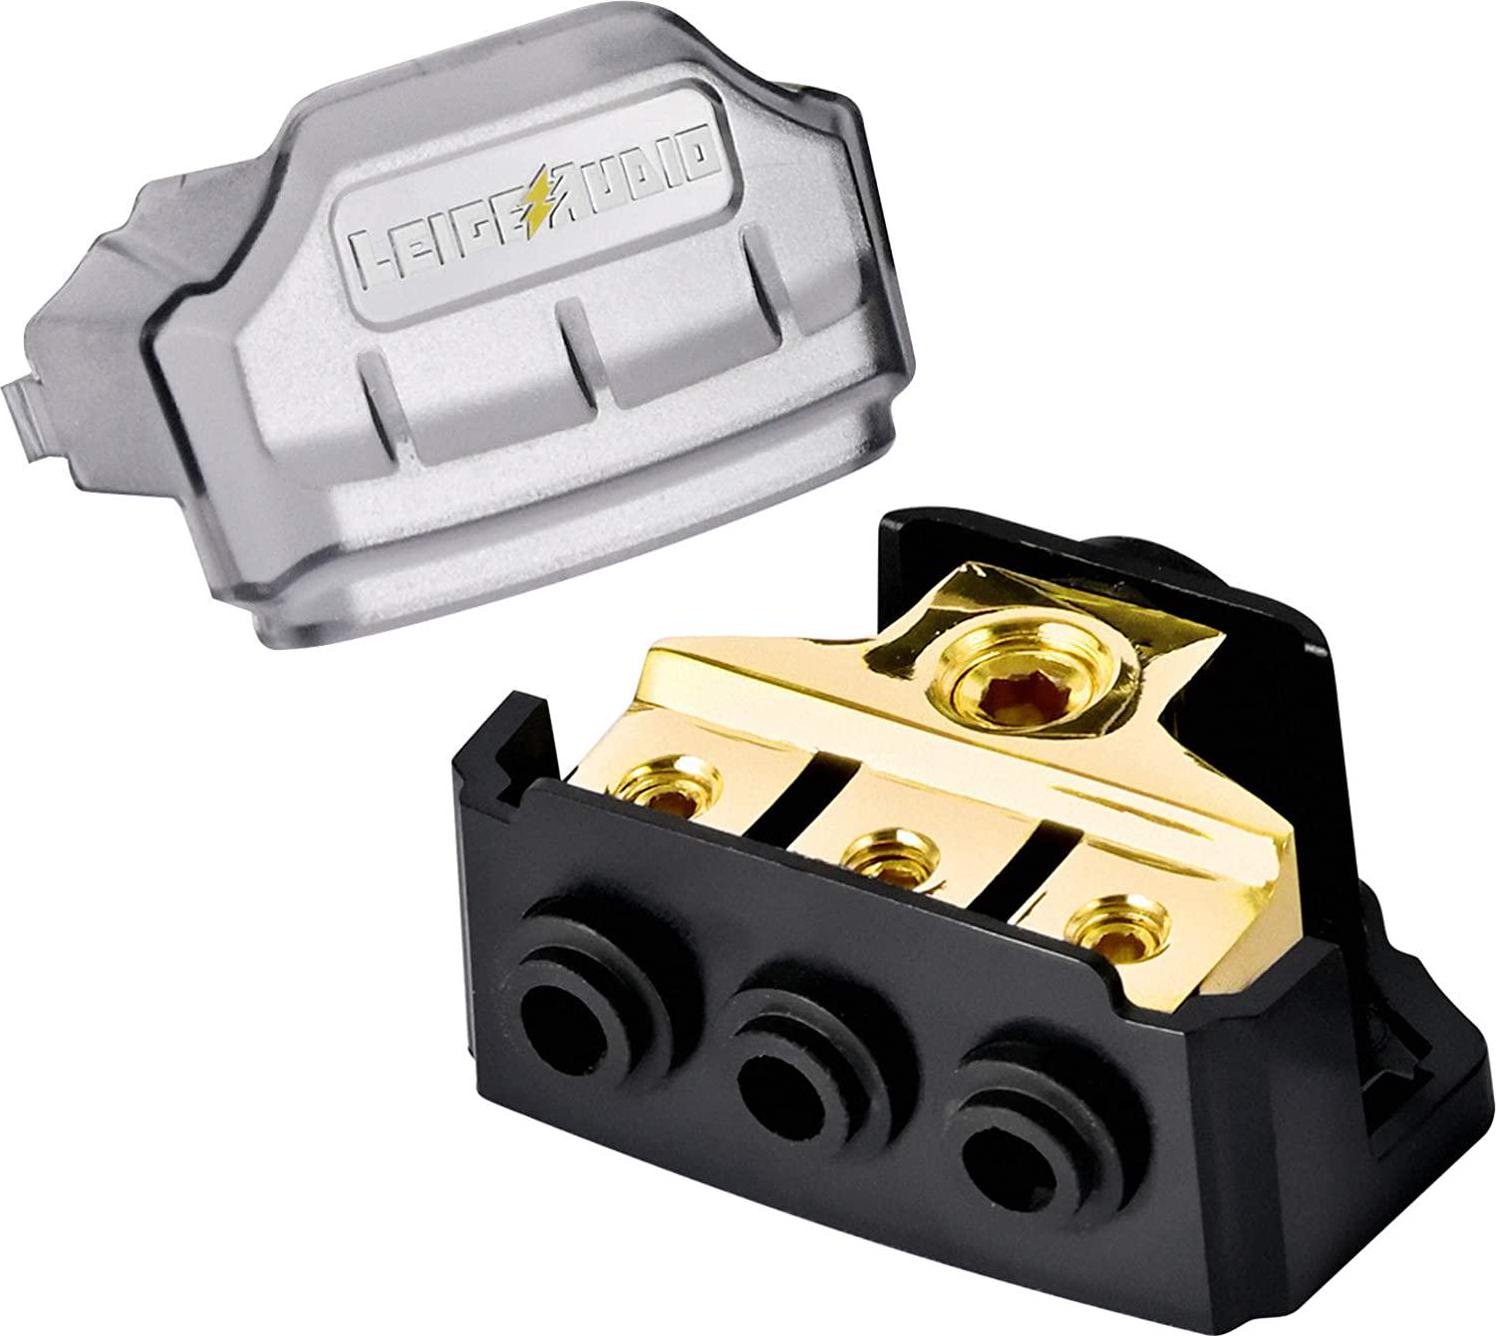 LEIGESAUDIO, LEIGESAUDIO 0/2/4 Gauge in 4/8/10 Gauge Out Copper Power Distribution Block for Car Audio Splitter (1 in 3 Out)